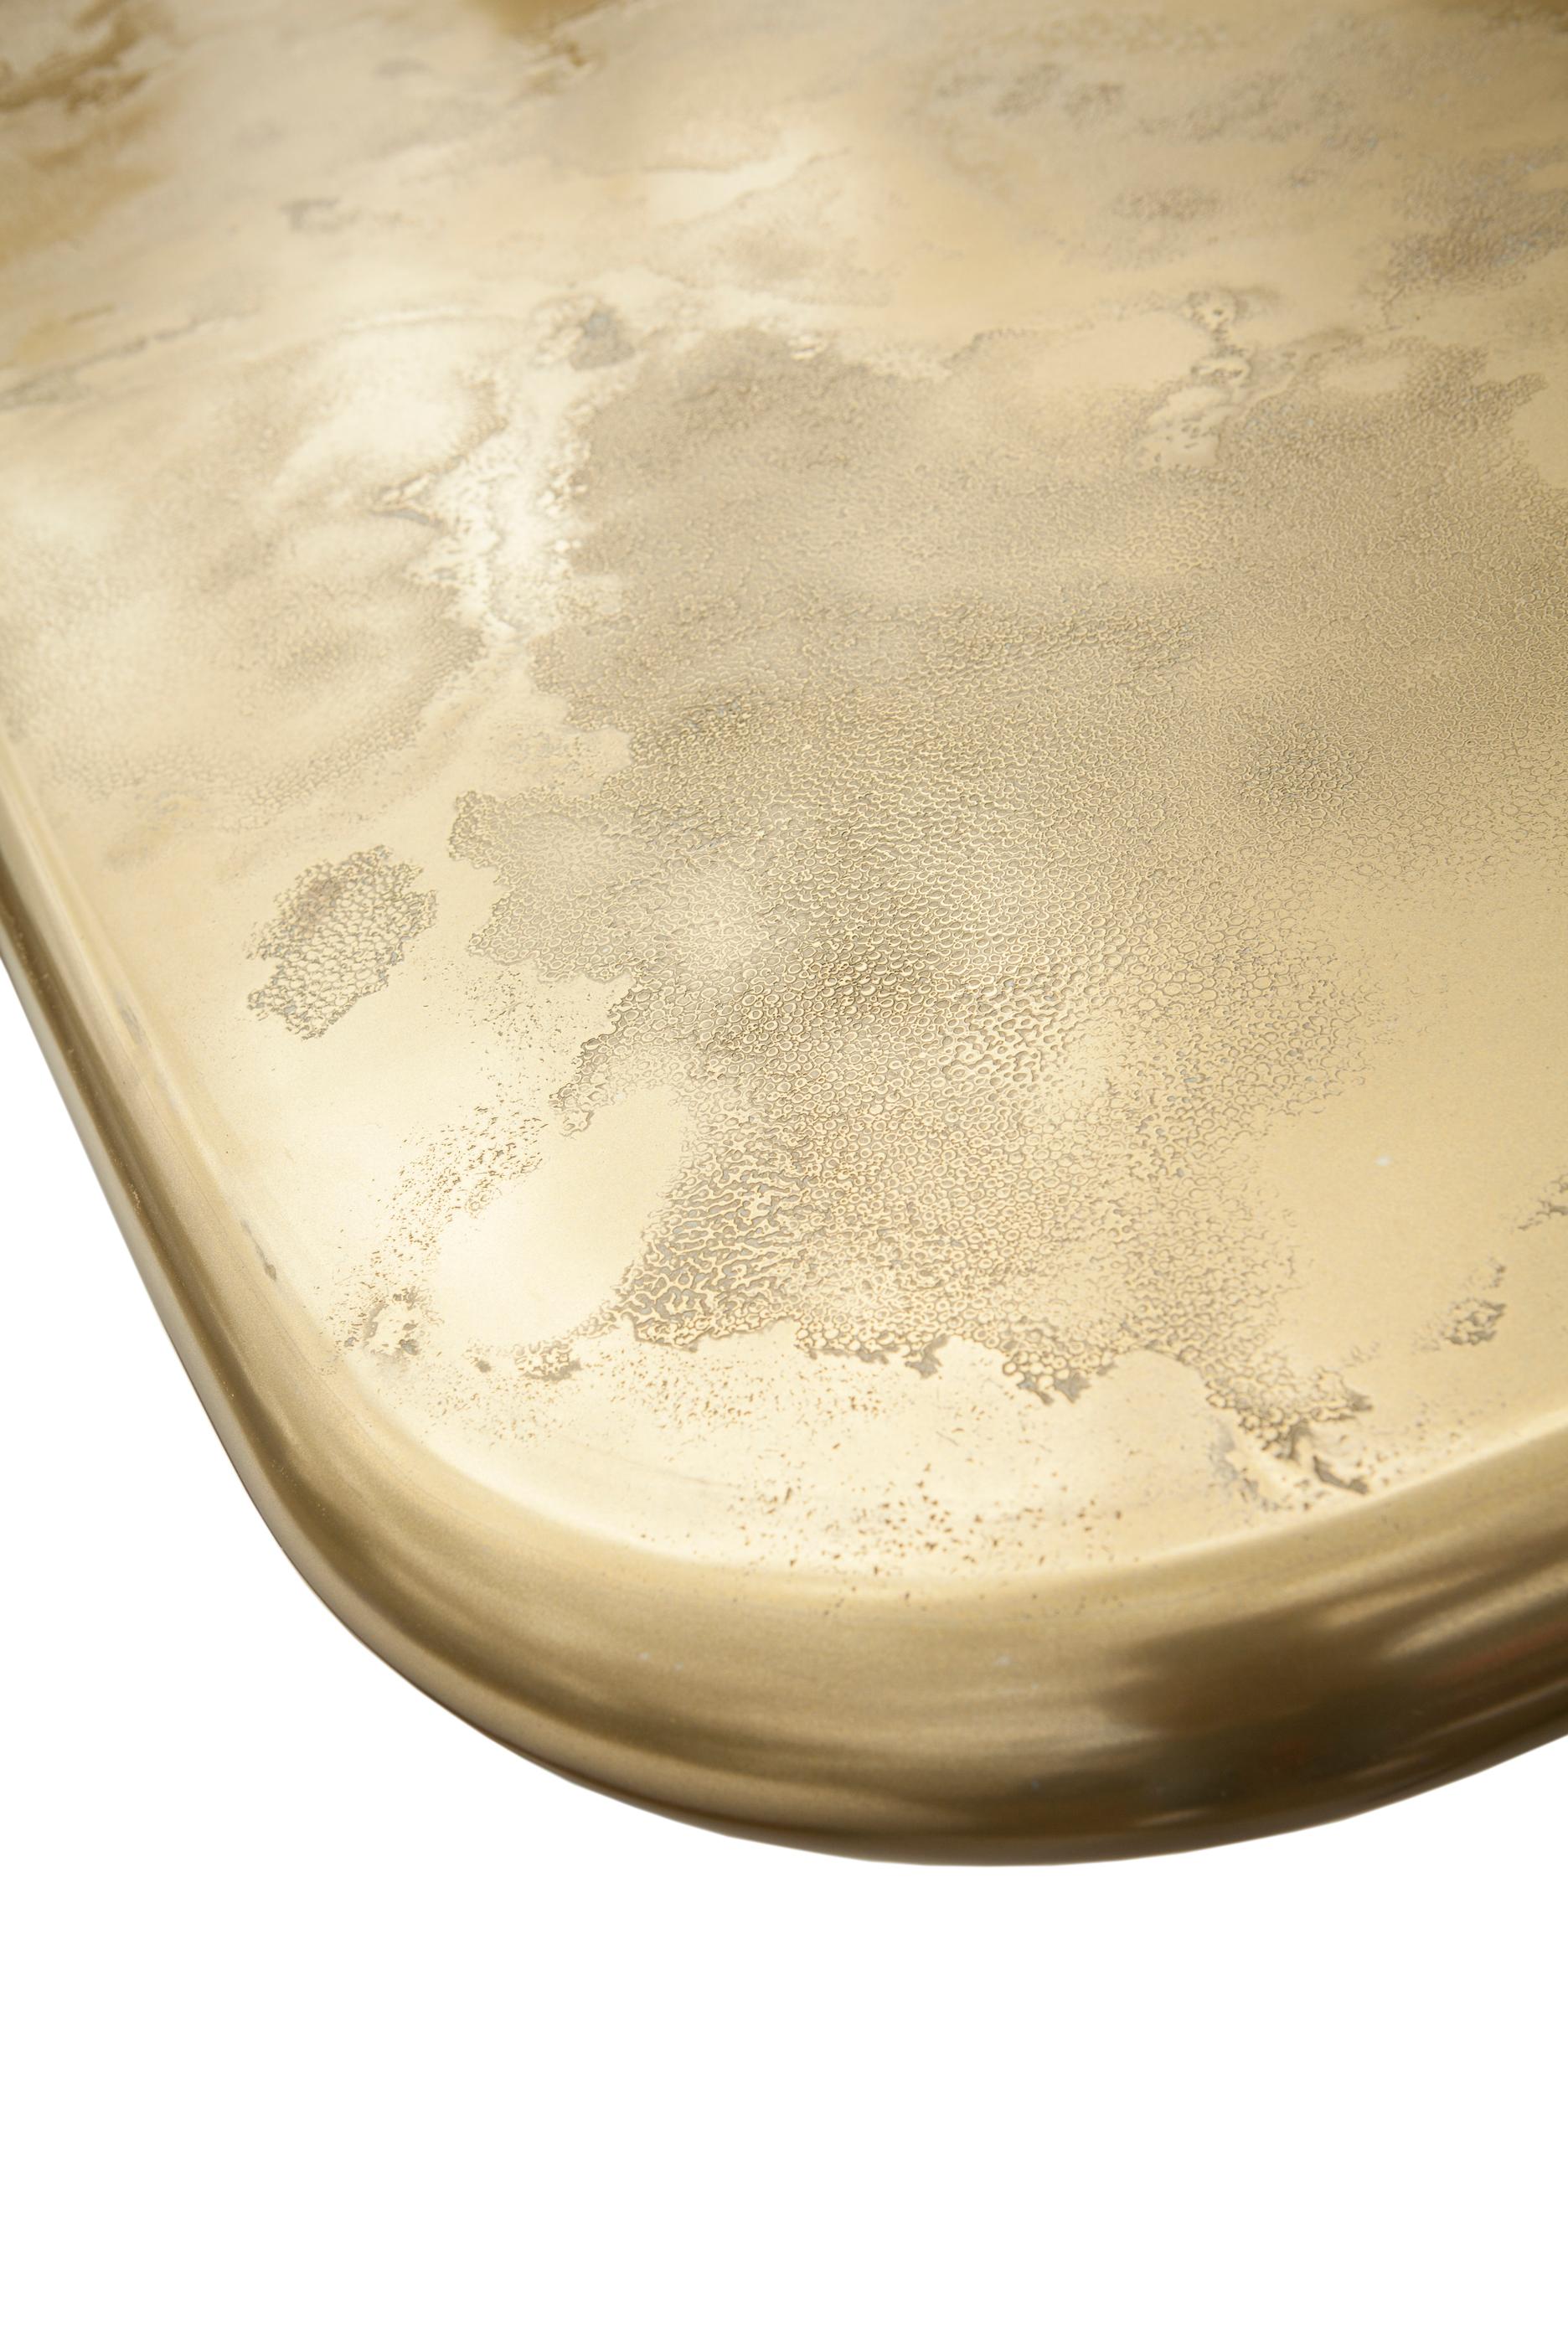 The Nassau dining table shows the capability of liquid metal as a new medium to create exquisite textures created by mixing pure metals with resins.

Here we make a champagne gold metal finish with a strong organic texture which is applied to a